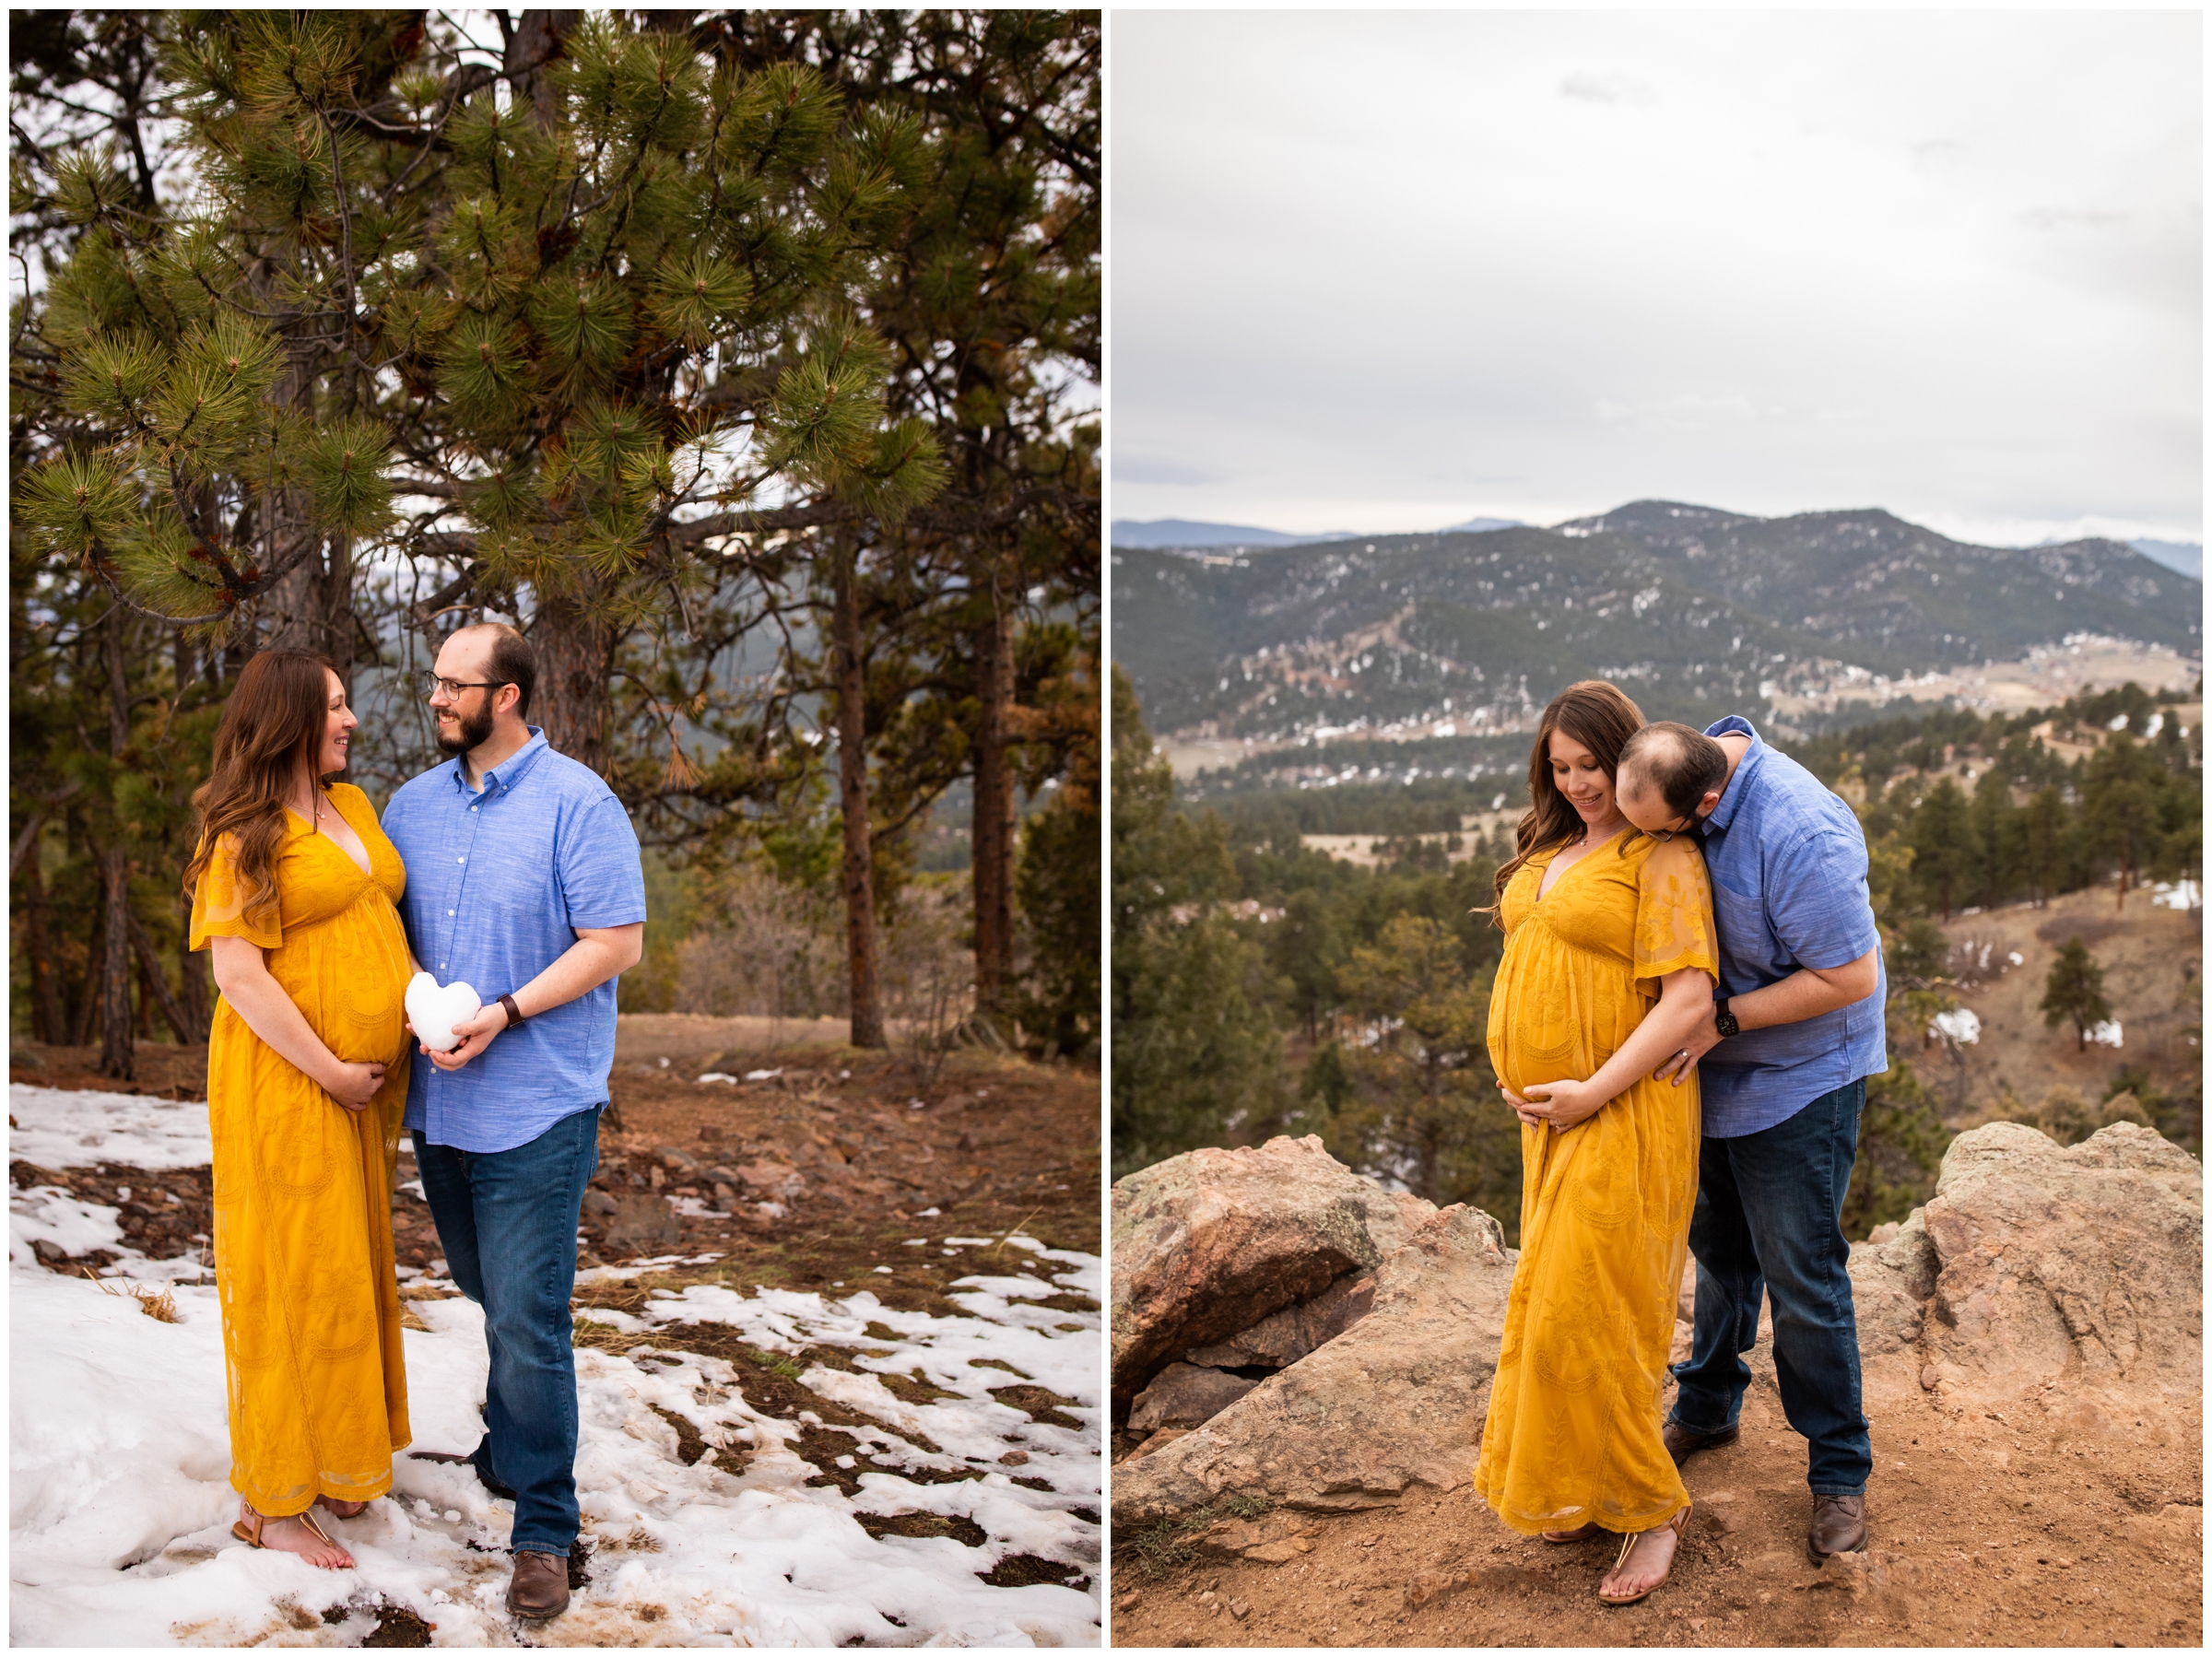 snowy maternity photography inspiration in the Colorado mountains 